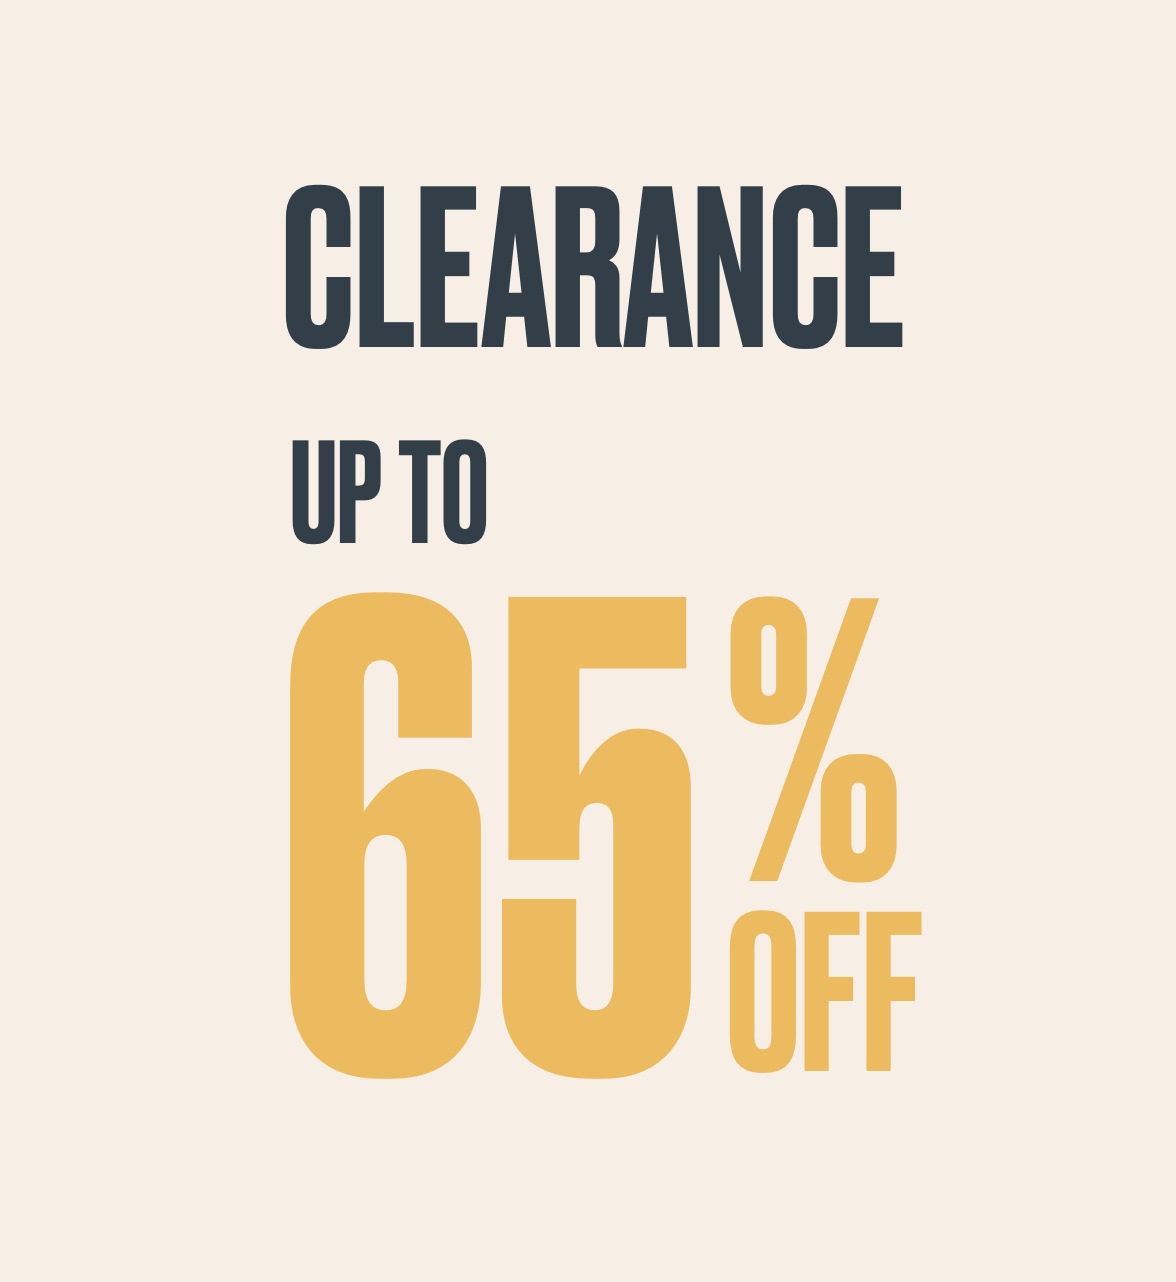 clearance up to 65% off